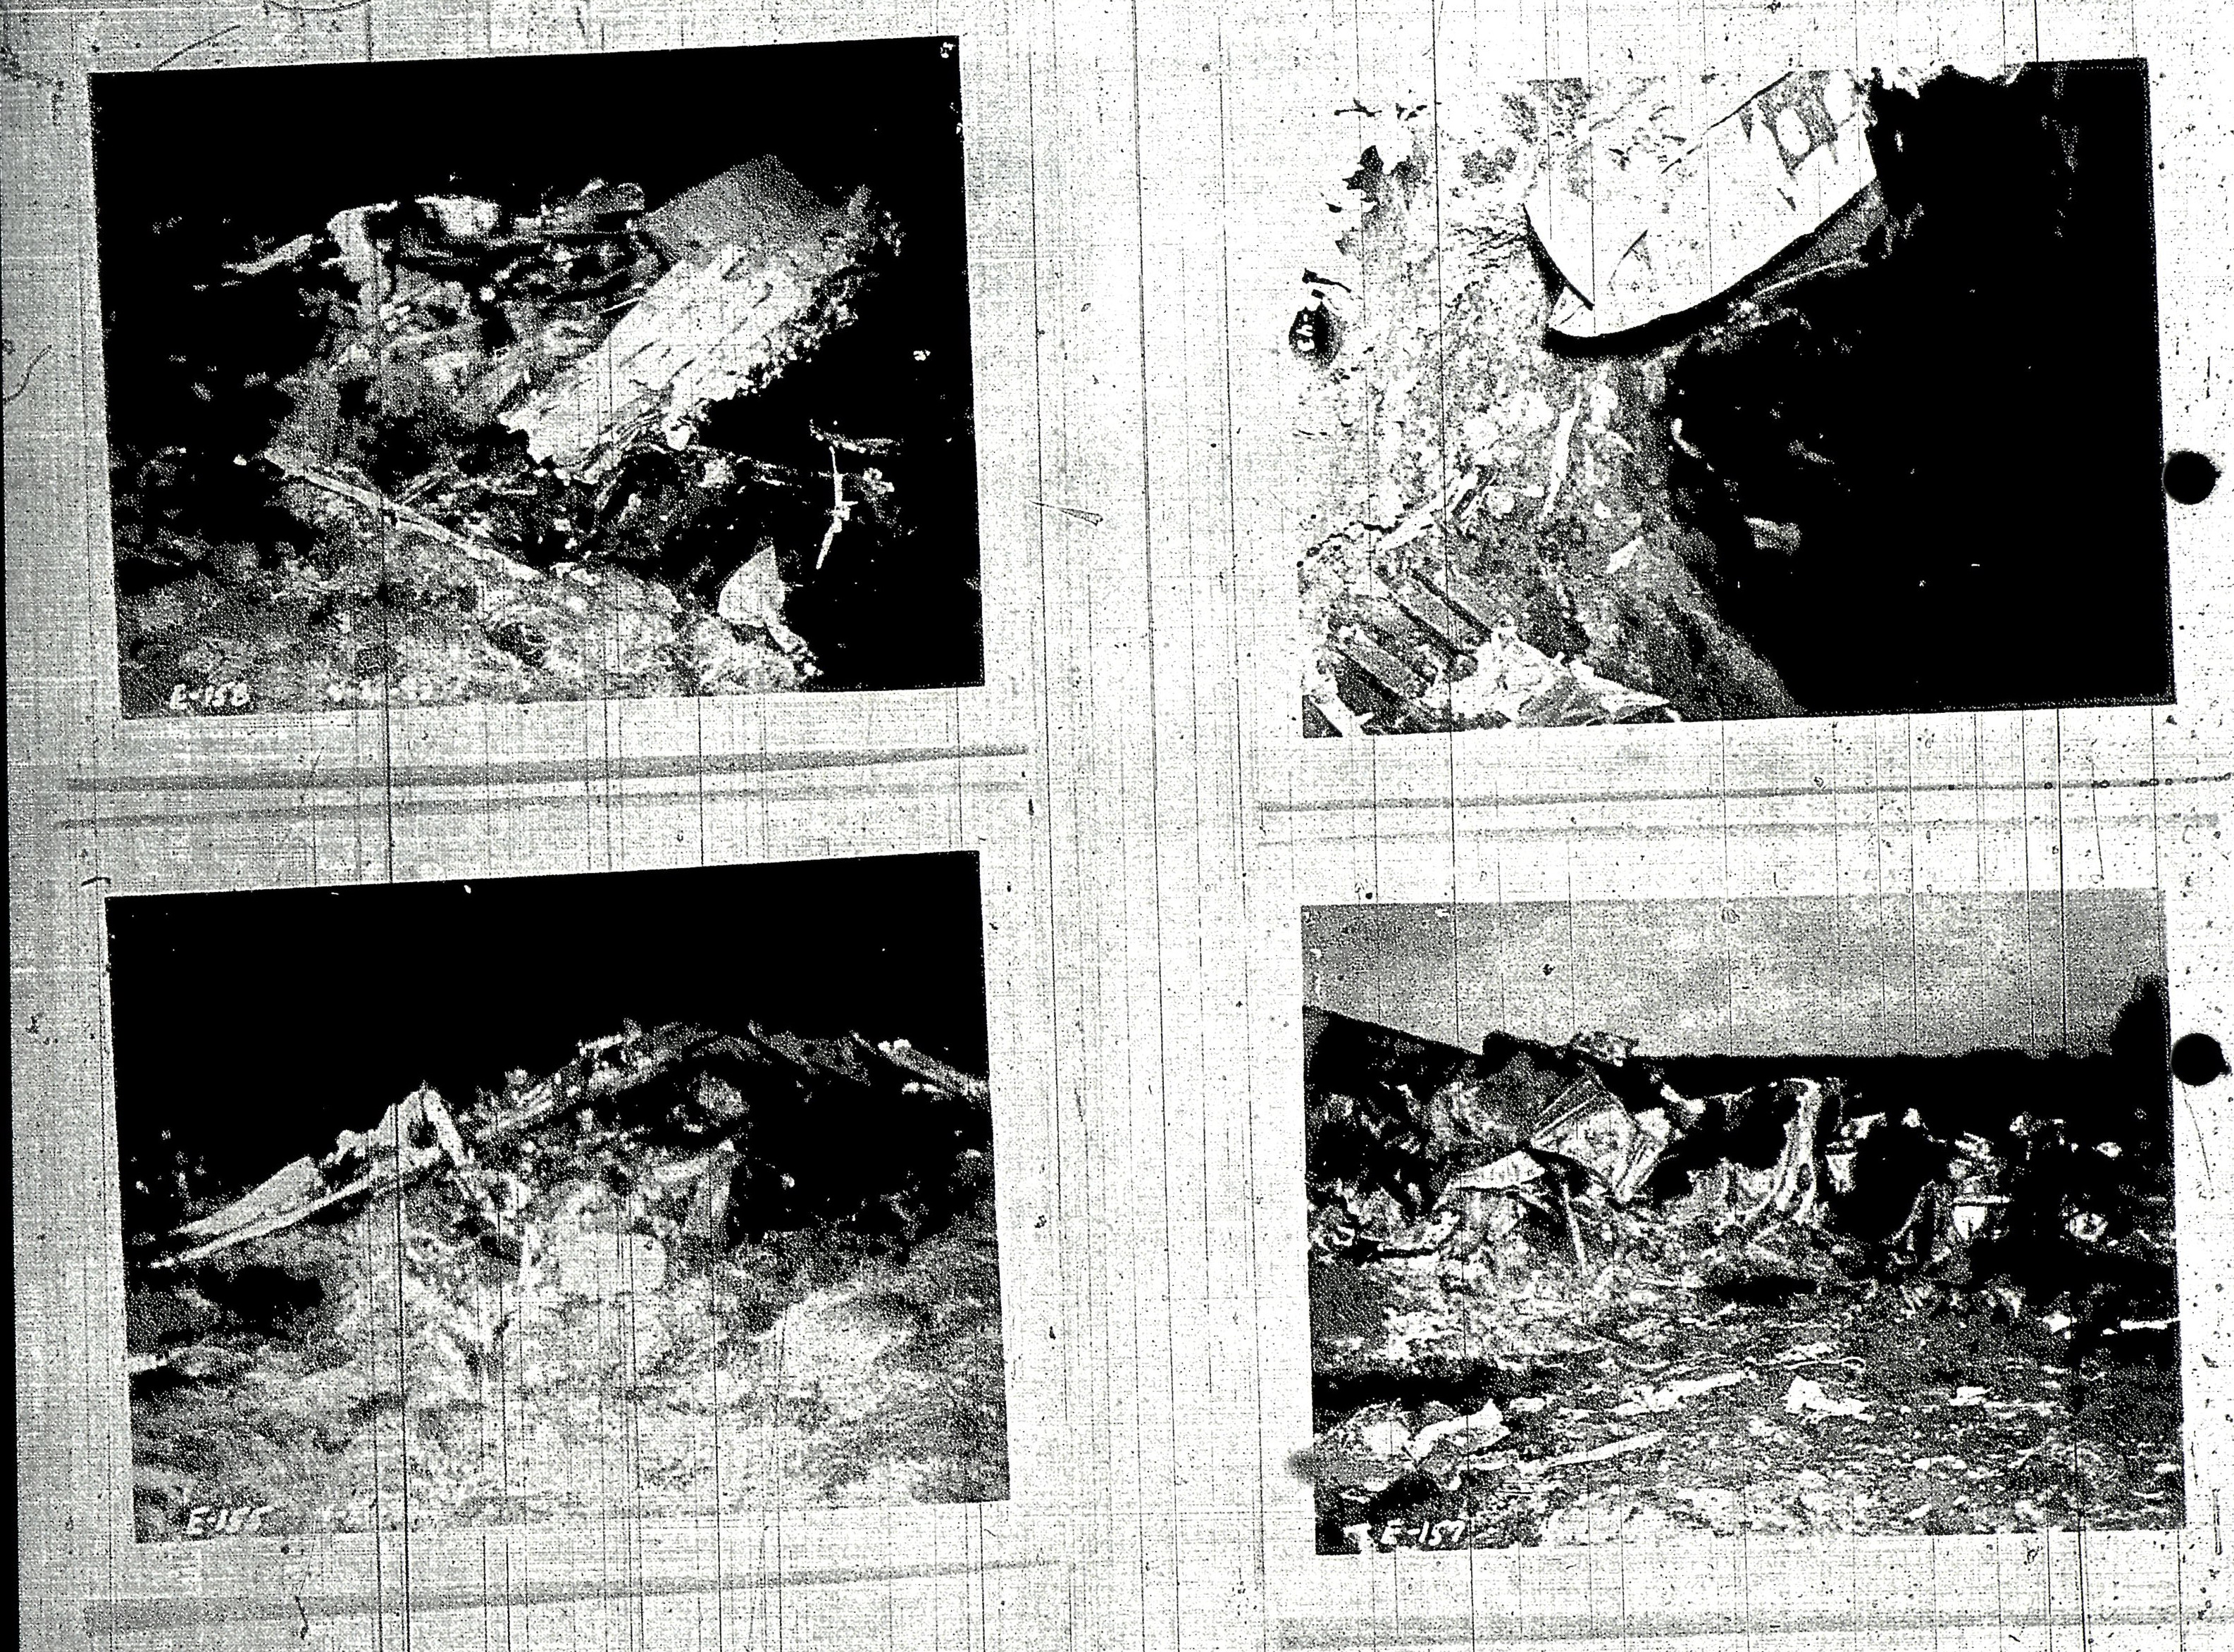 Official USAAF photographs of the wreckage taken that evening.